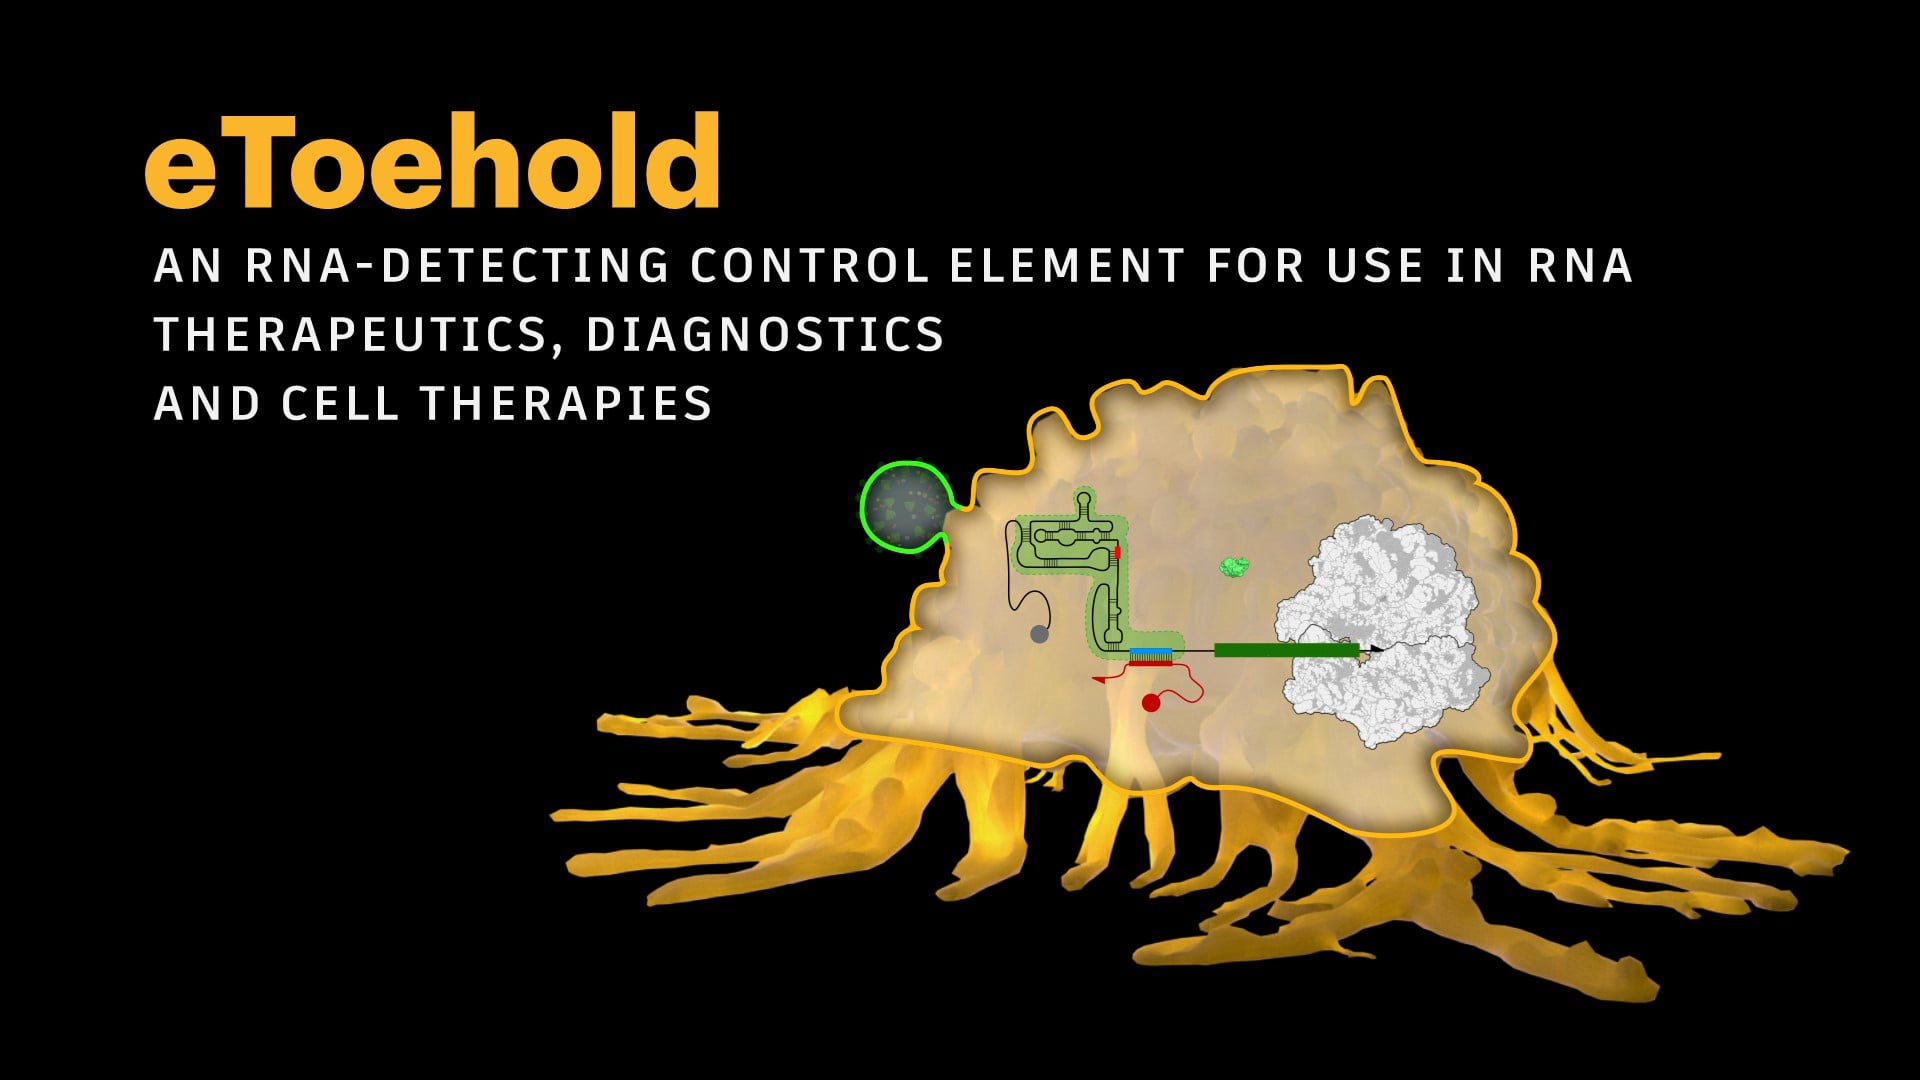 eToehold: an RNA-detecting control element for use in RNA therapeutics, diagnostics and cell therapies